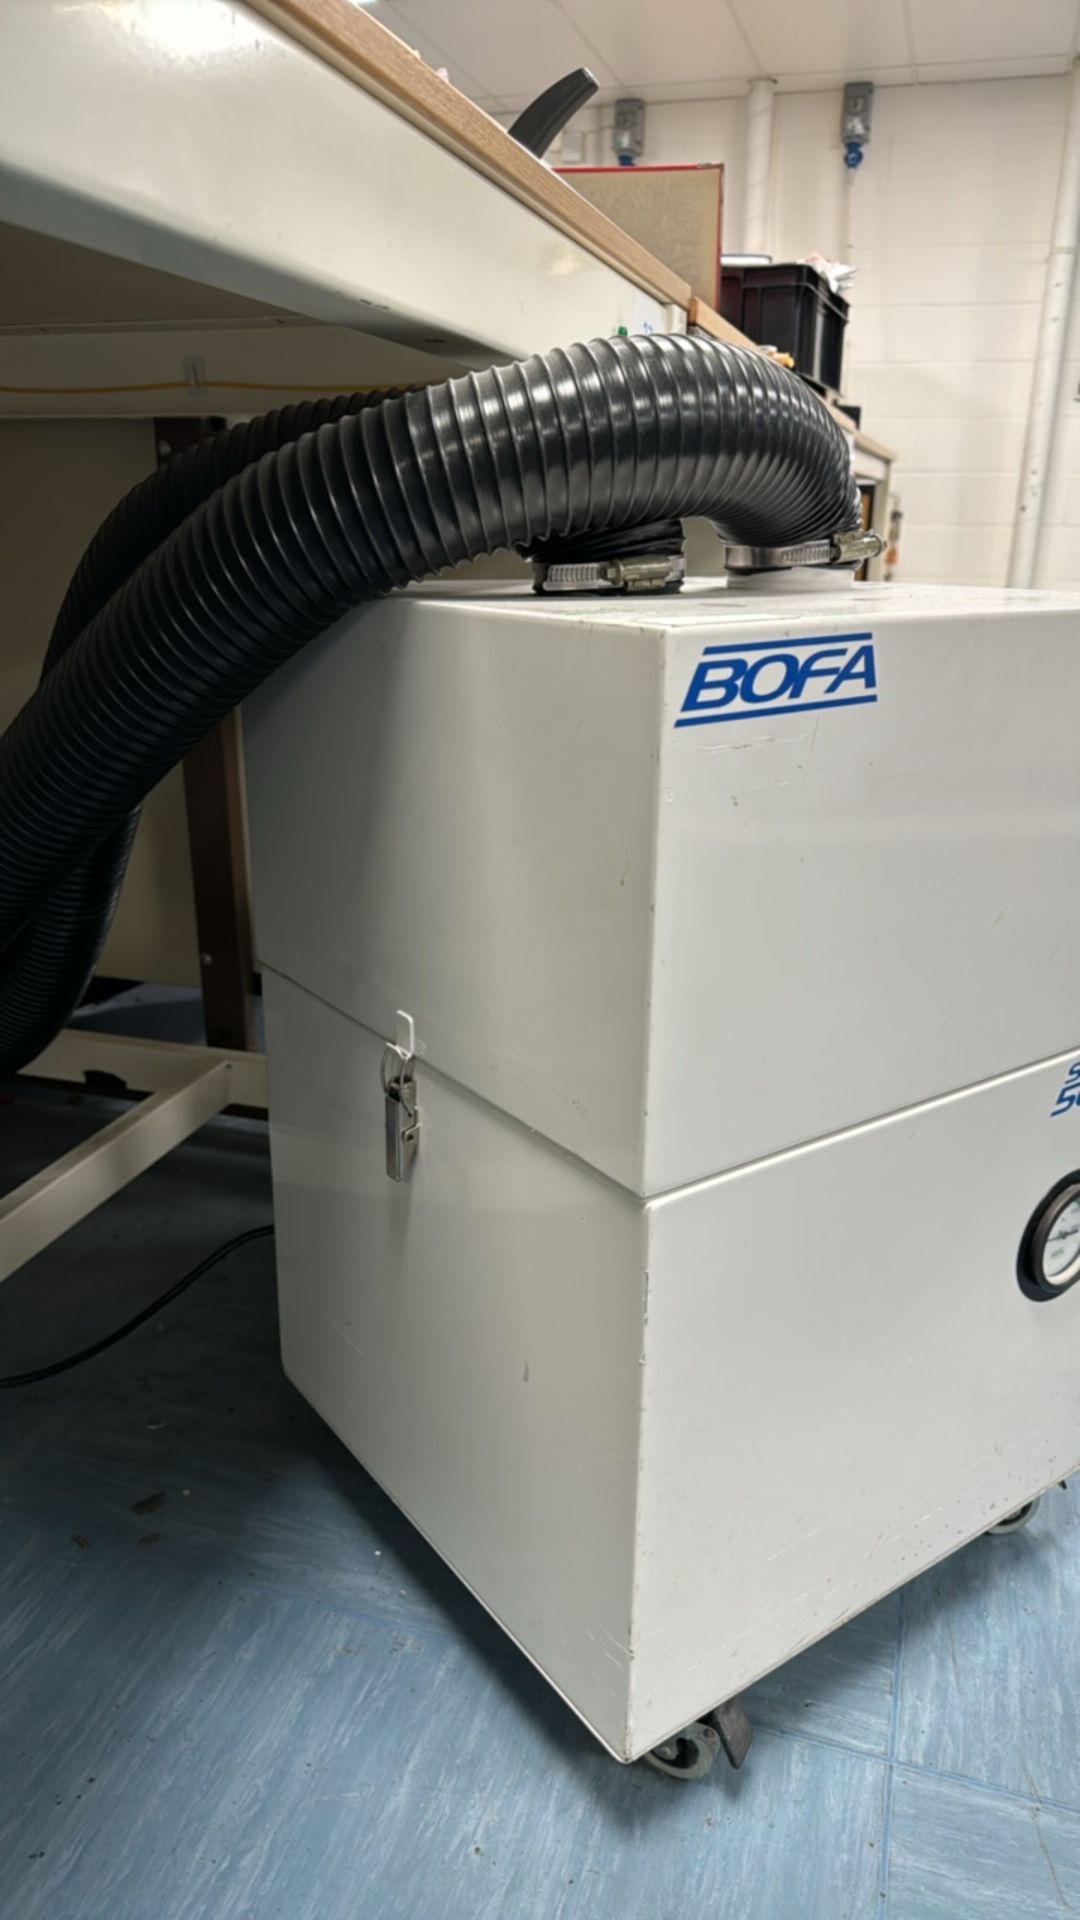 Bofa System 500 Fume Extractor - Image 3 of 6